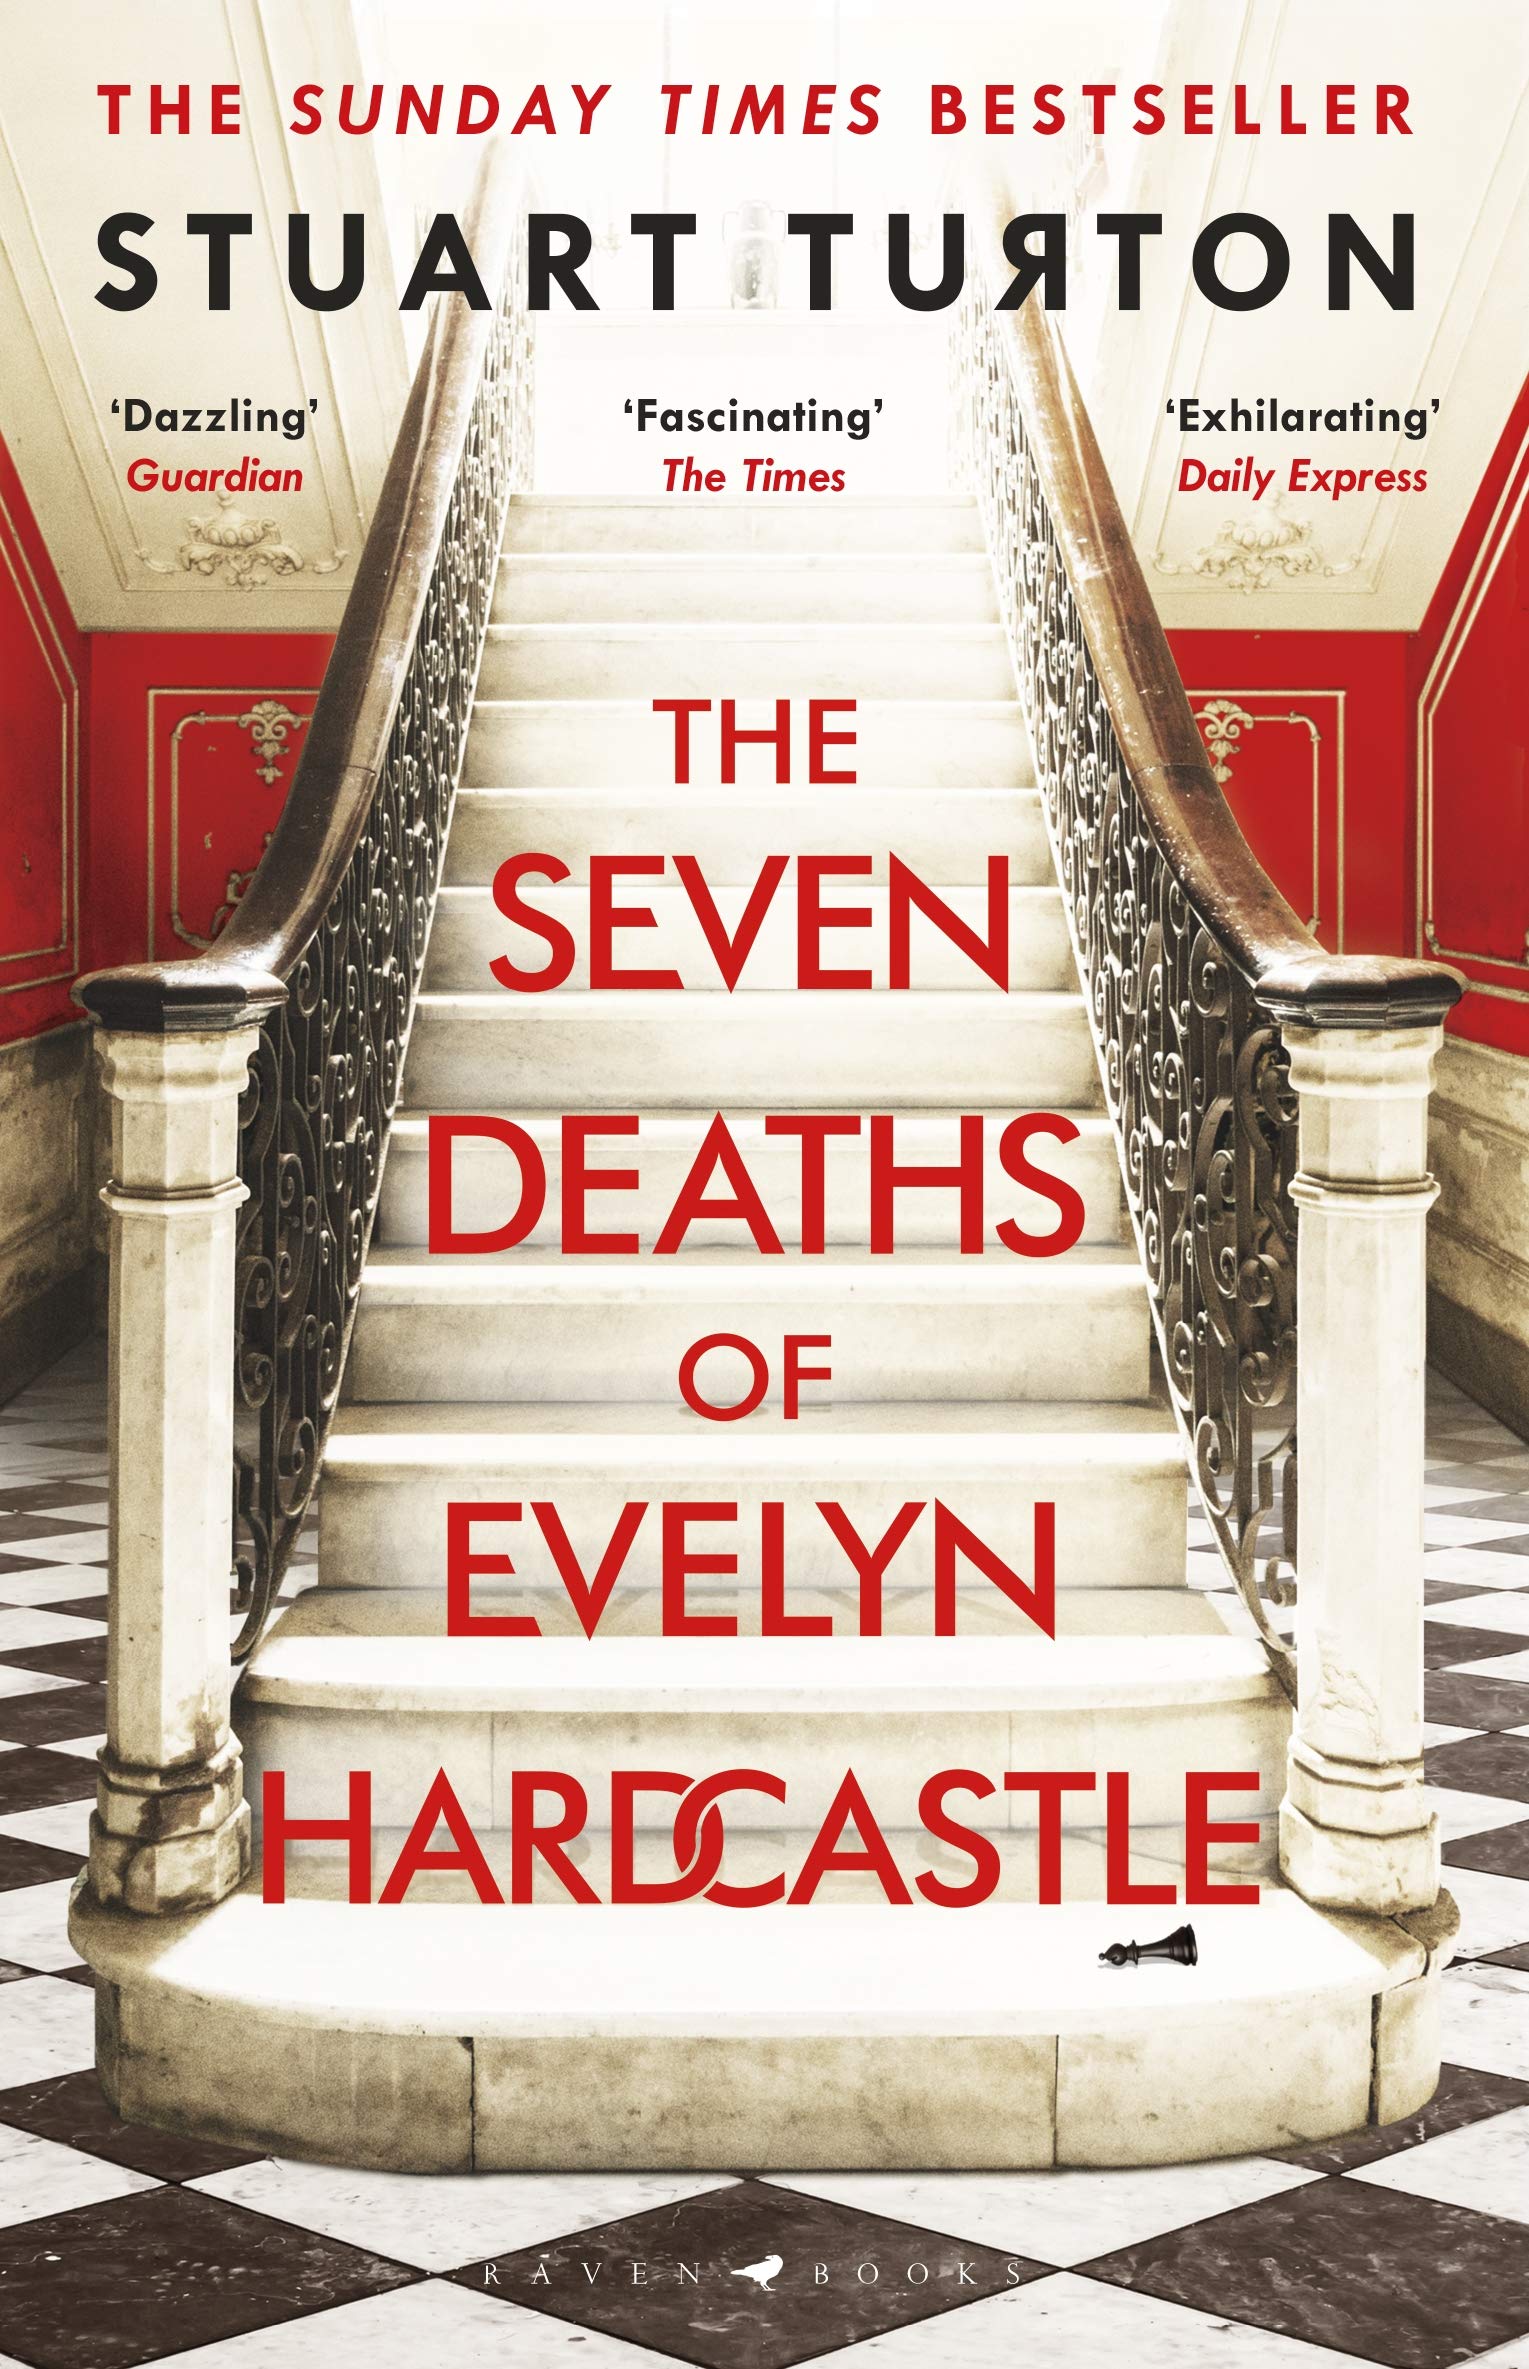 Truyện đọc tiếng Anh: The Seven Deaths of Evelyn Hardcastle